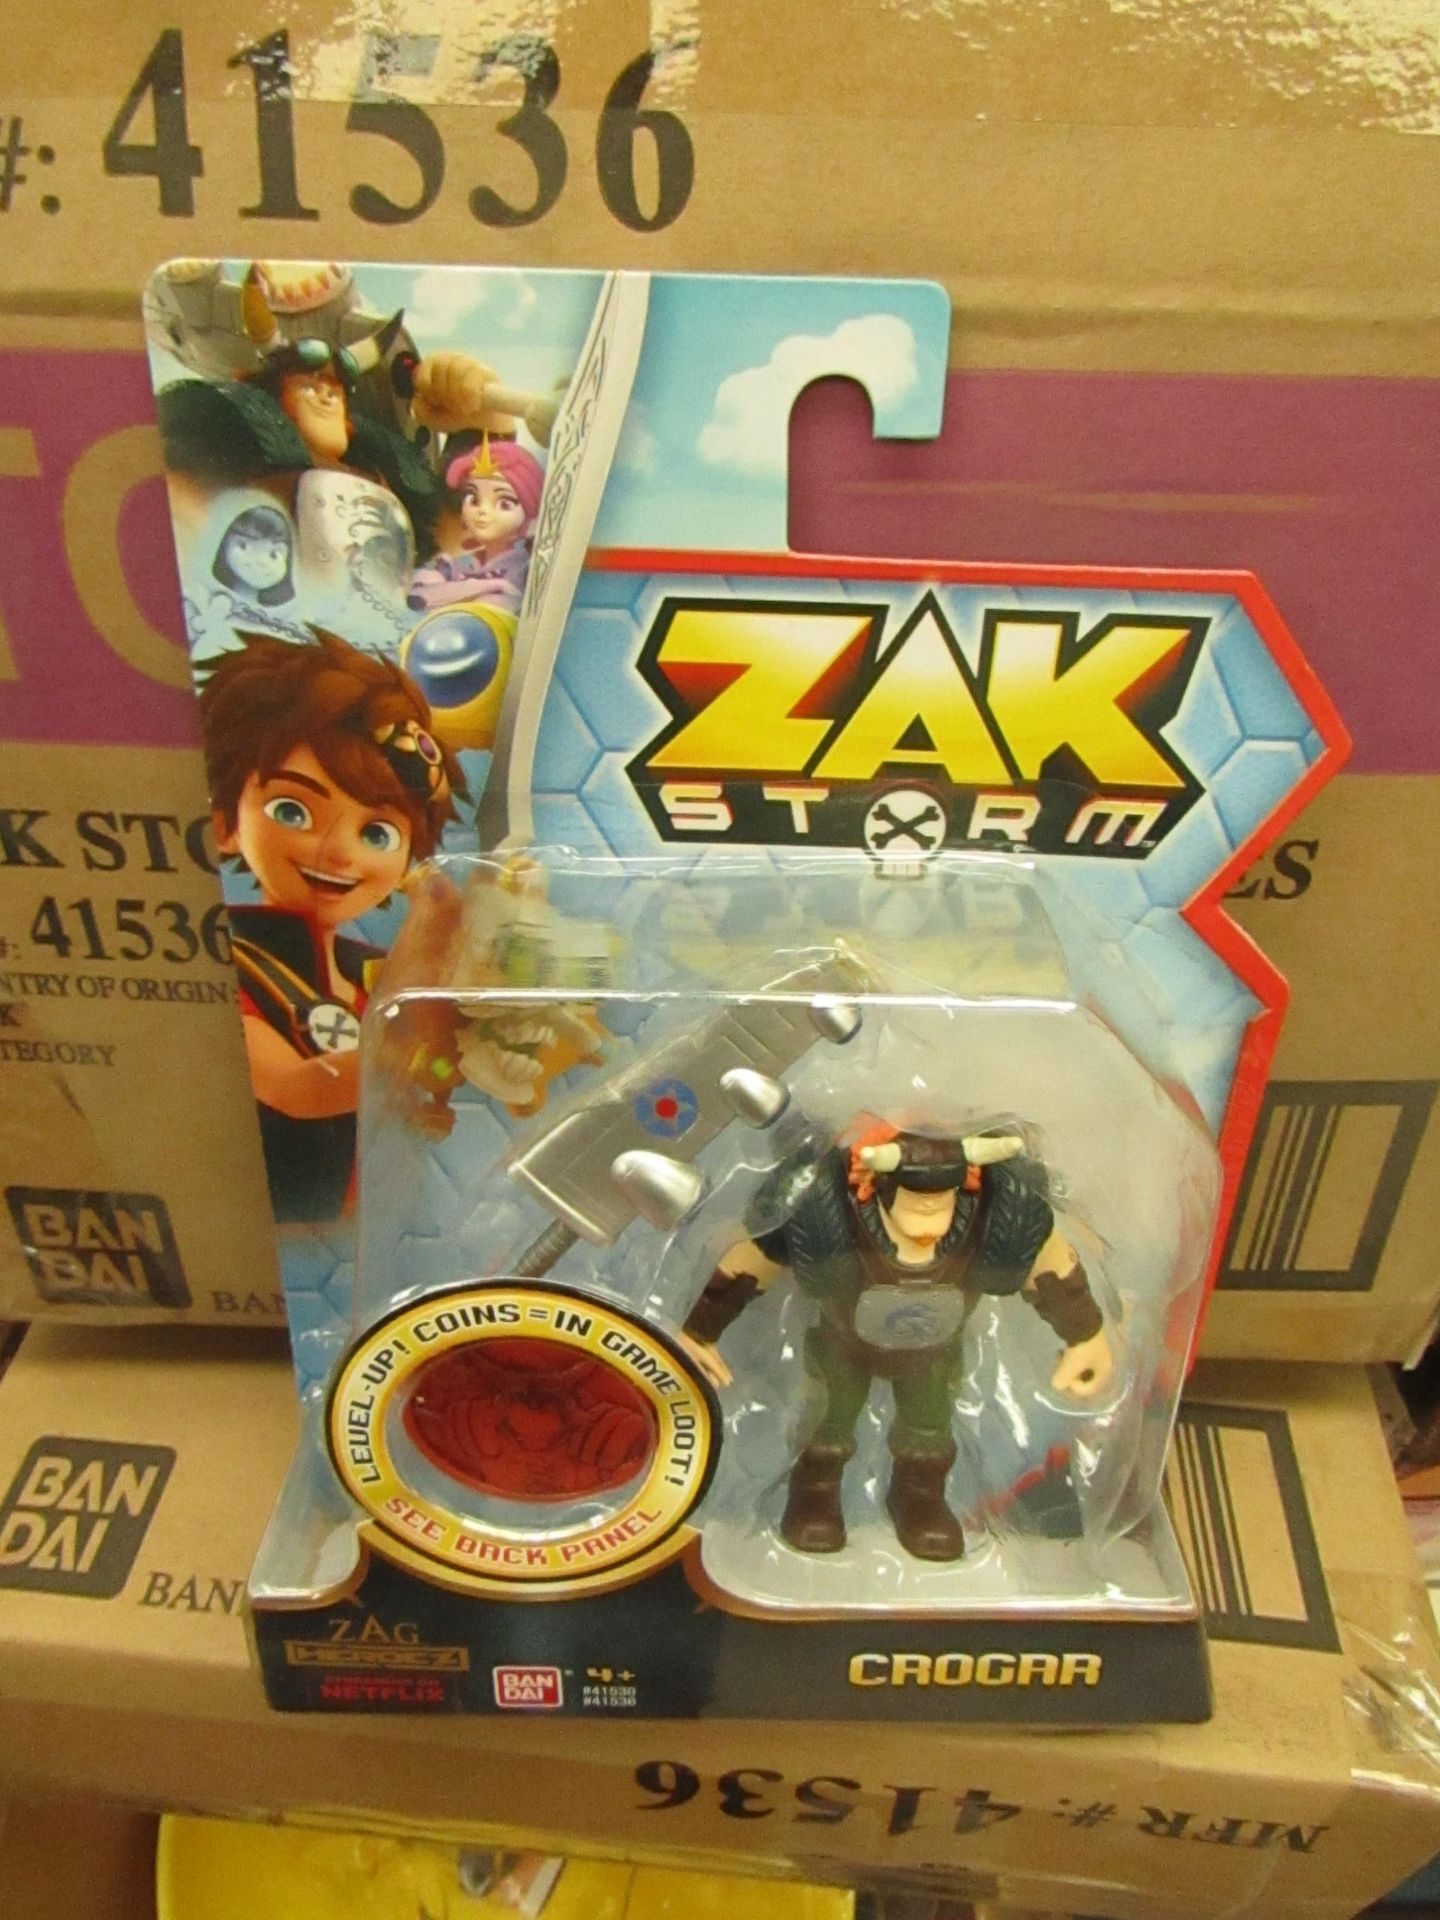 4x Zak Storm - 3" Action Figures - Unused, Packaged & Boxed.